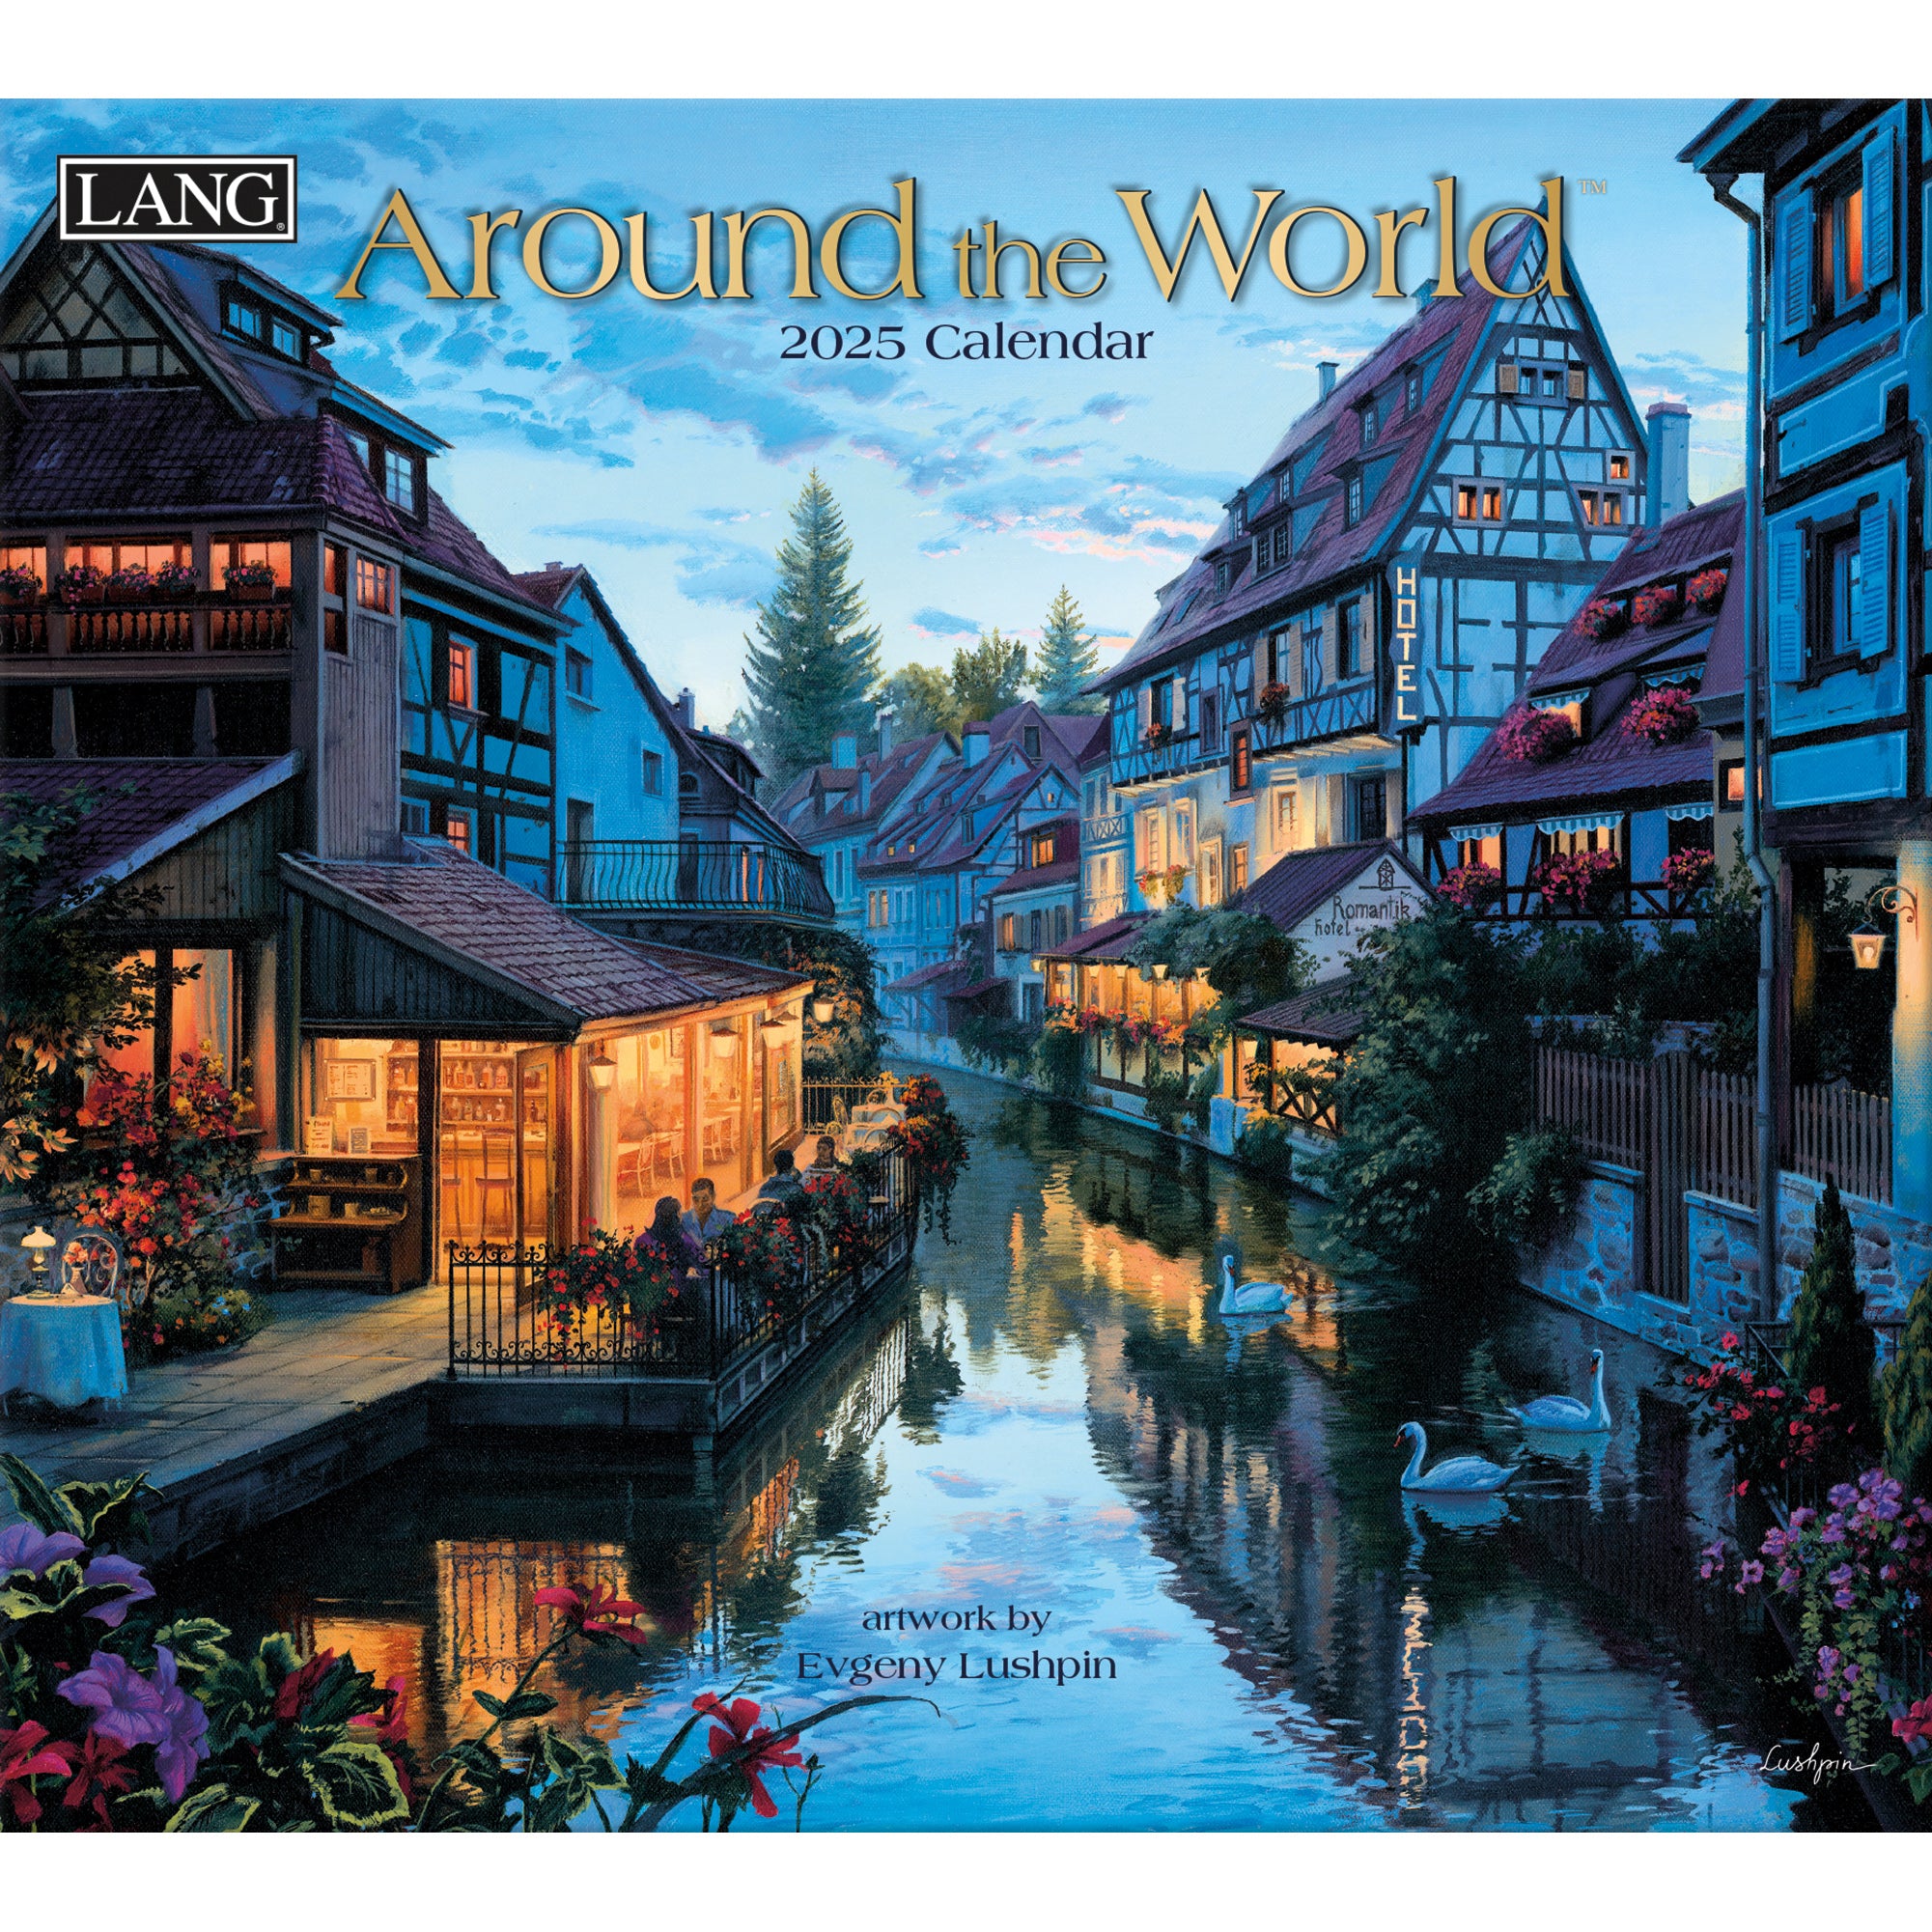 2025 Around The World By Evgeny Lushpin - LANG Deluxe Wall Calendar